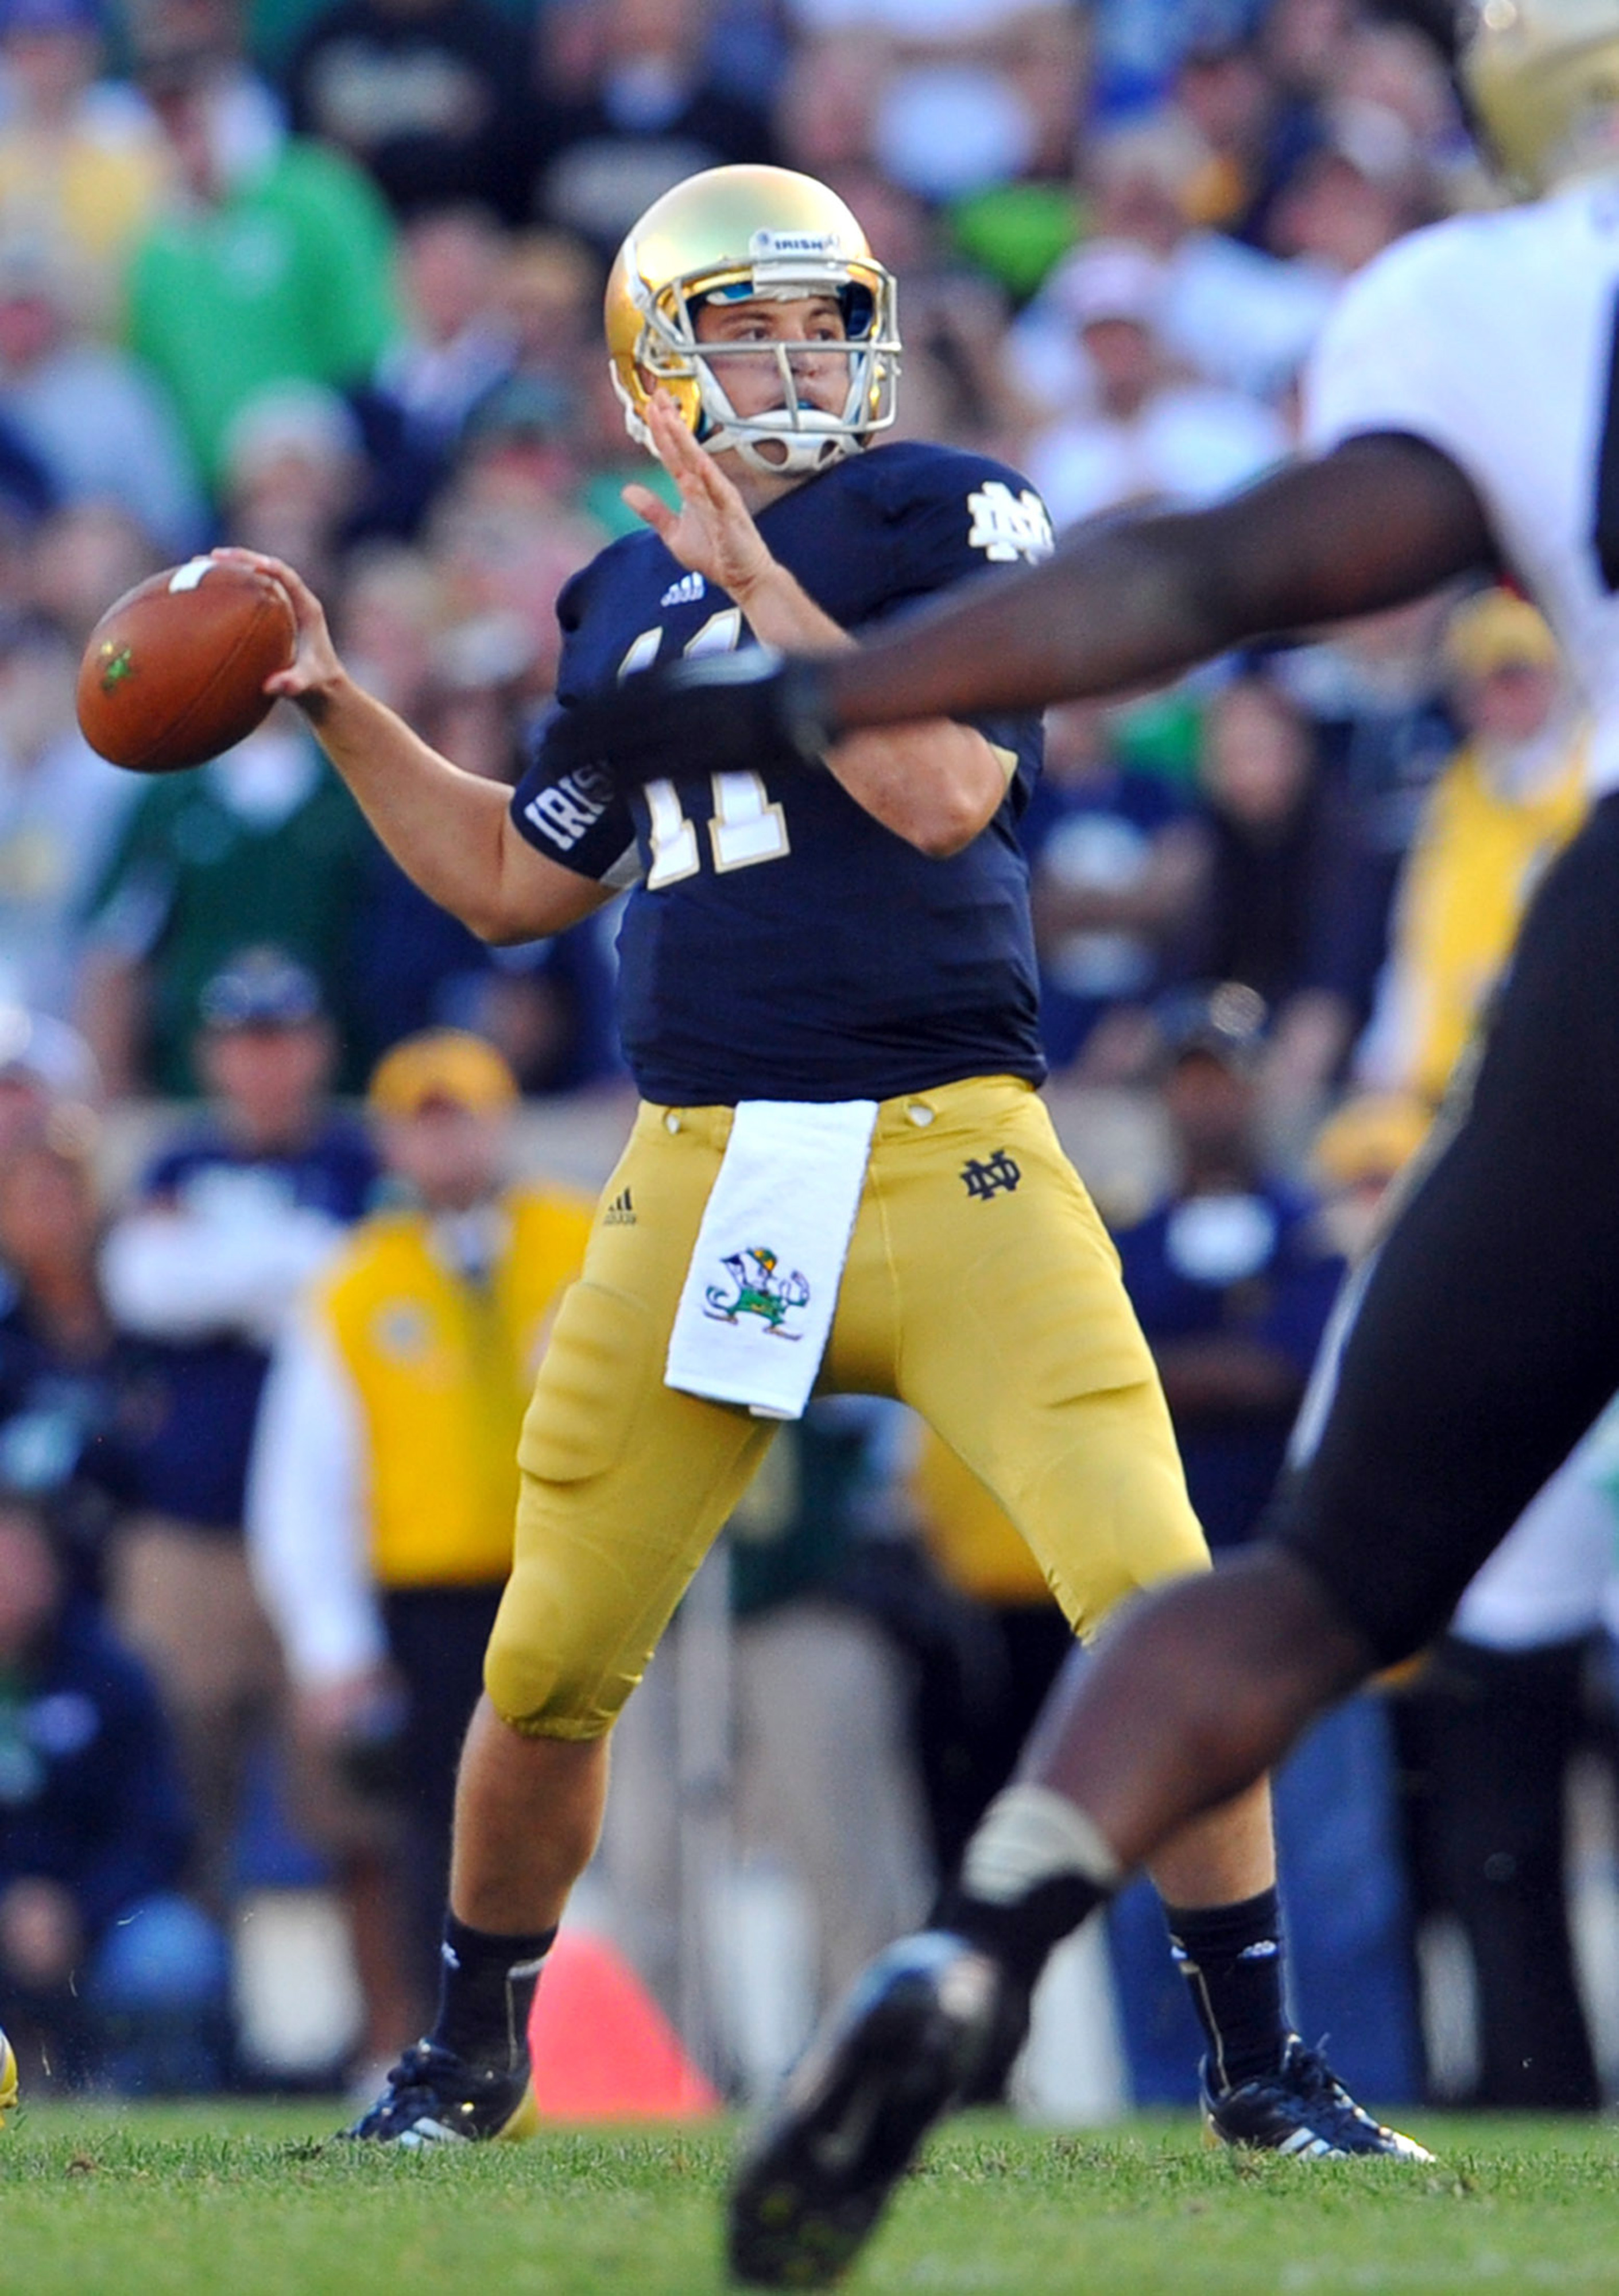 Sep 8, 2012; South Bend, IN, USA; Notre Dame Fighting Irish quarterback Tommy Rees (11) throws in the fourth quarter against the Purdue Boilermakers at Notre Dame Stadium. Notre Dame won 20-17. Mandatory Credit: Matt Cashore-US PRESSWIRE